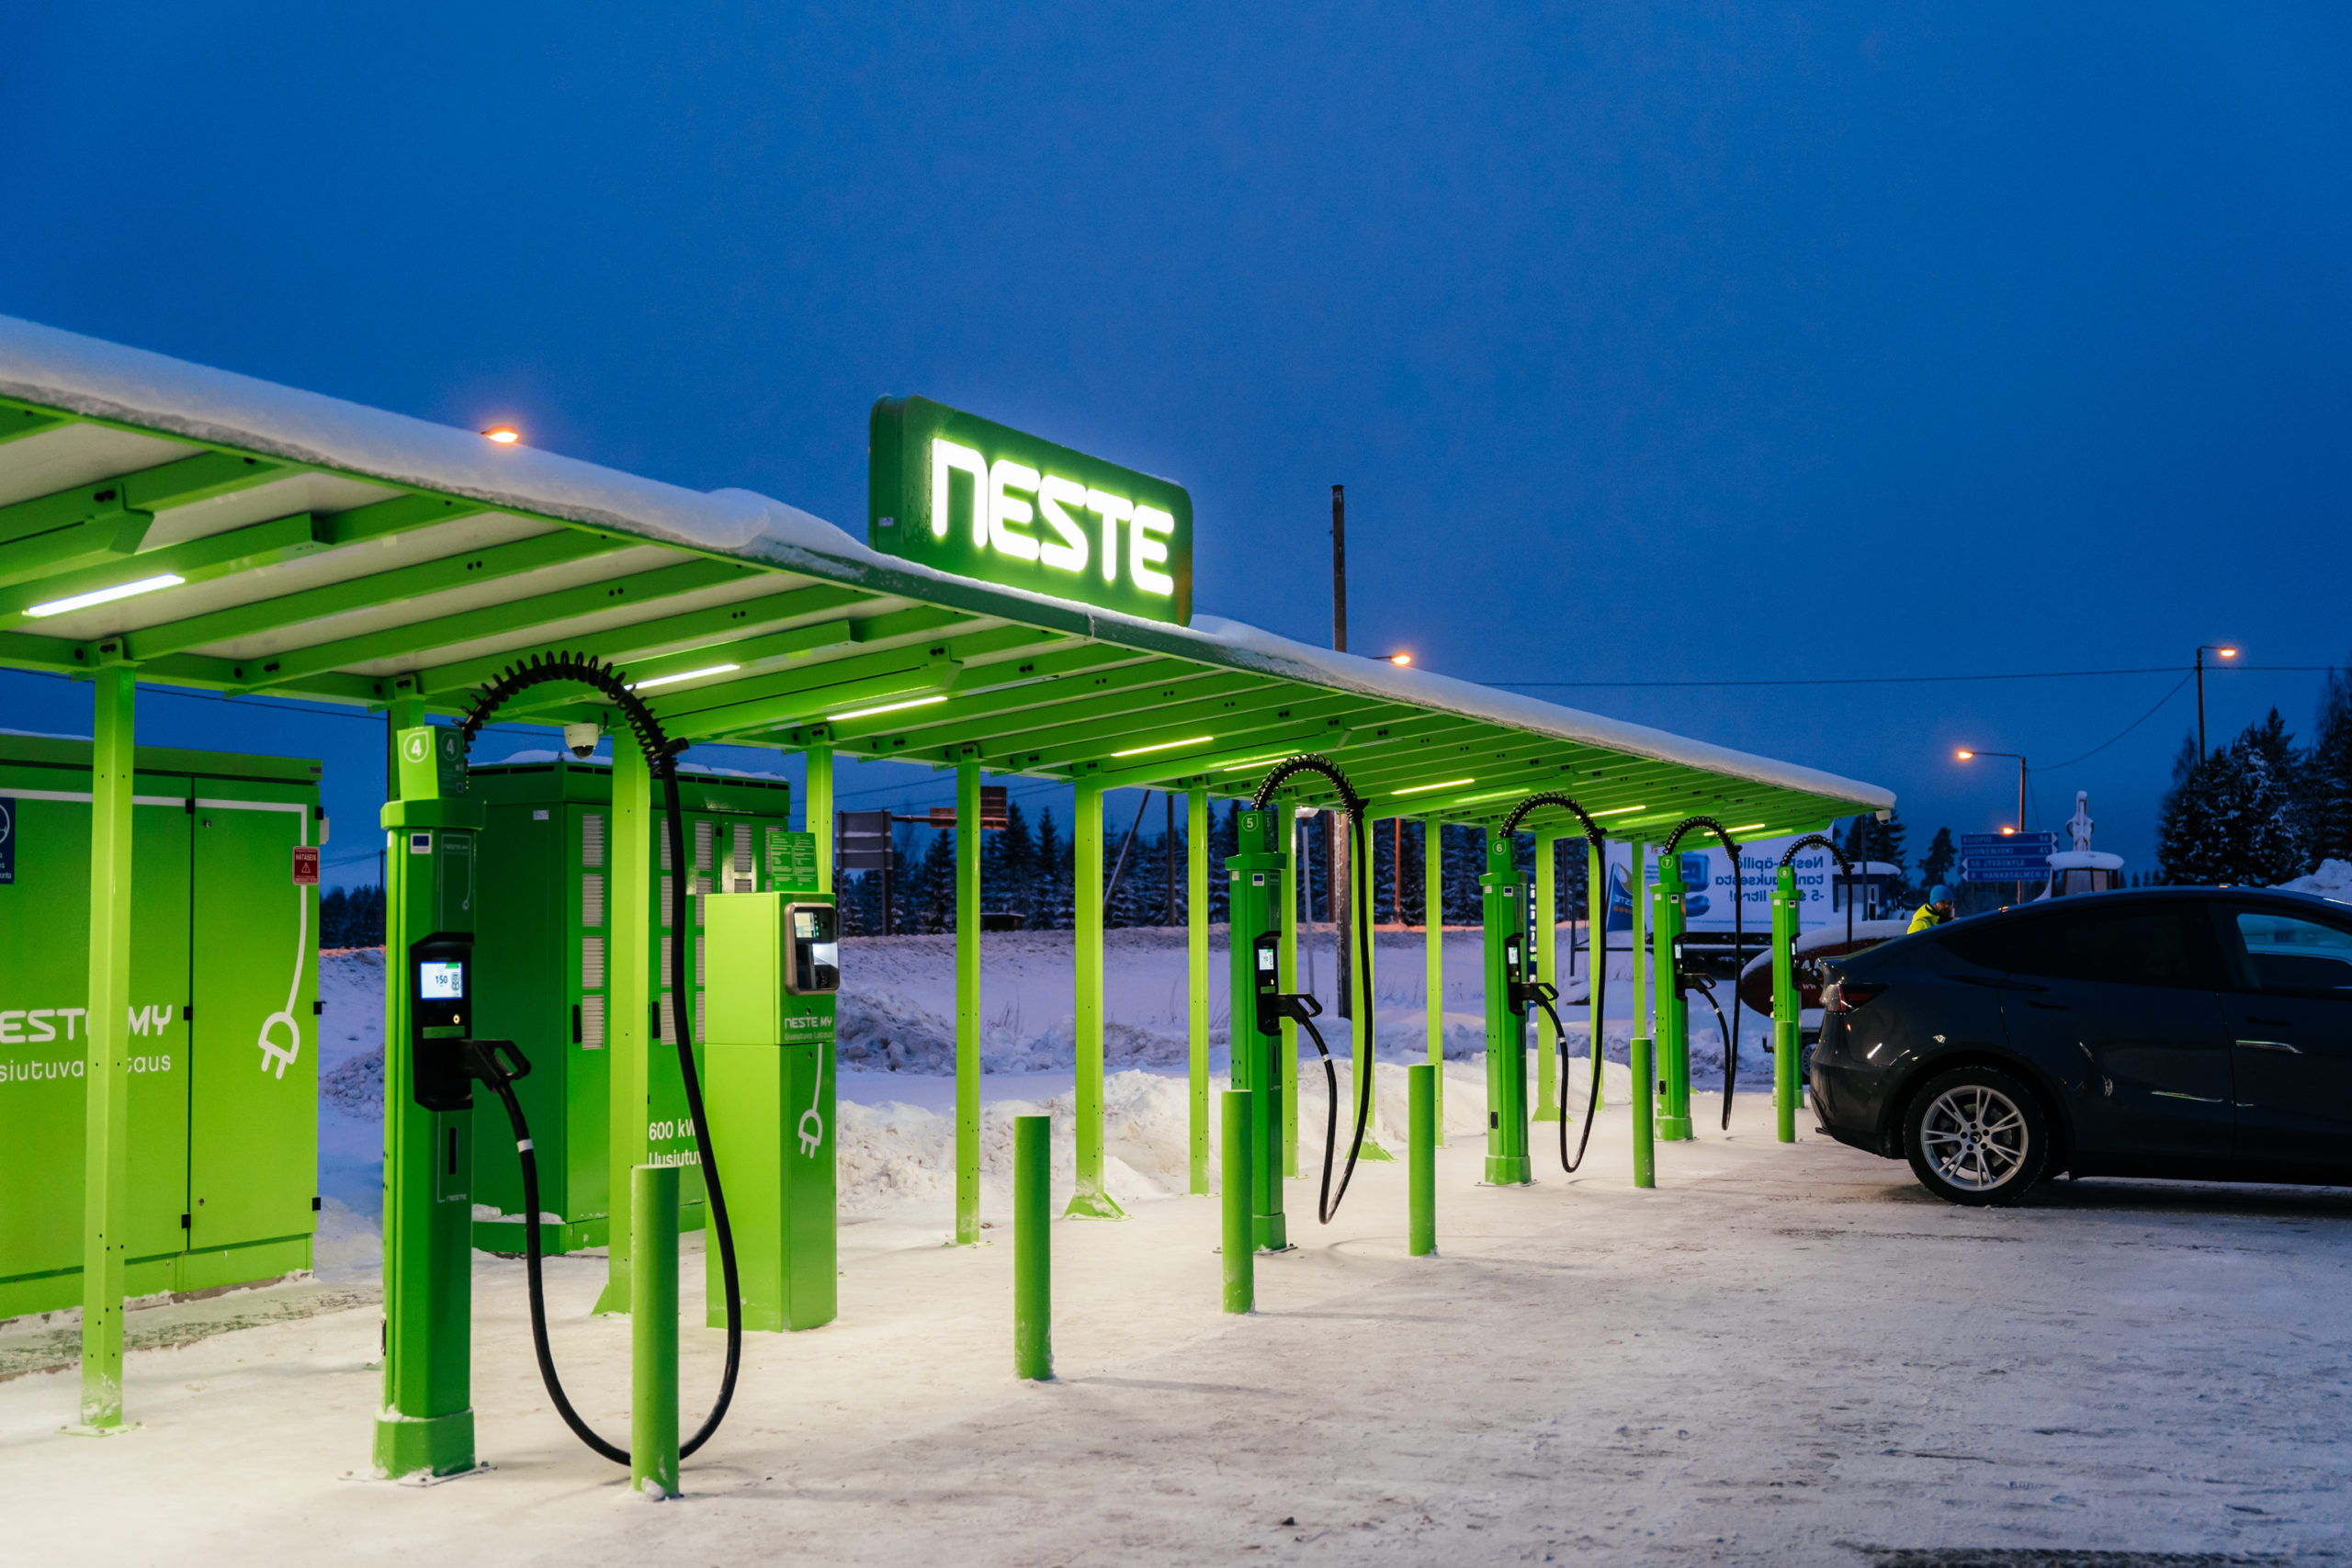 Neste charging station with kempower chargers